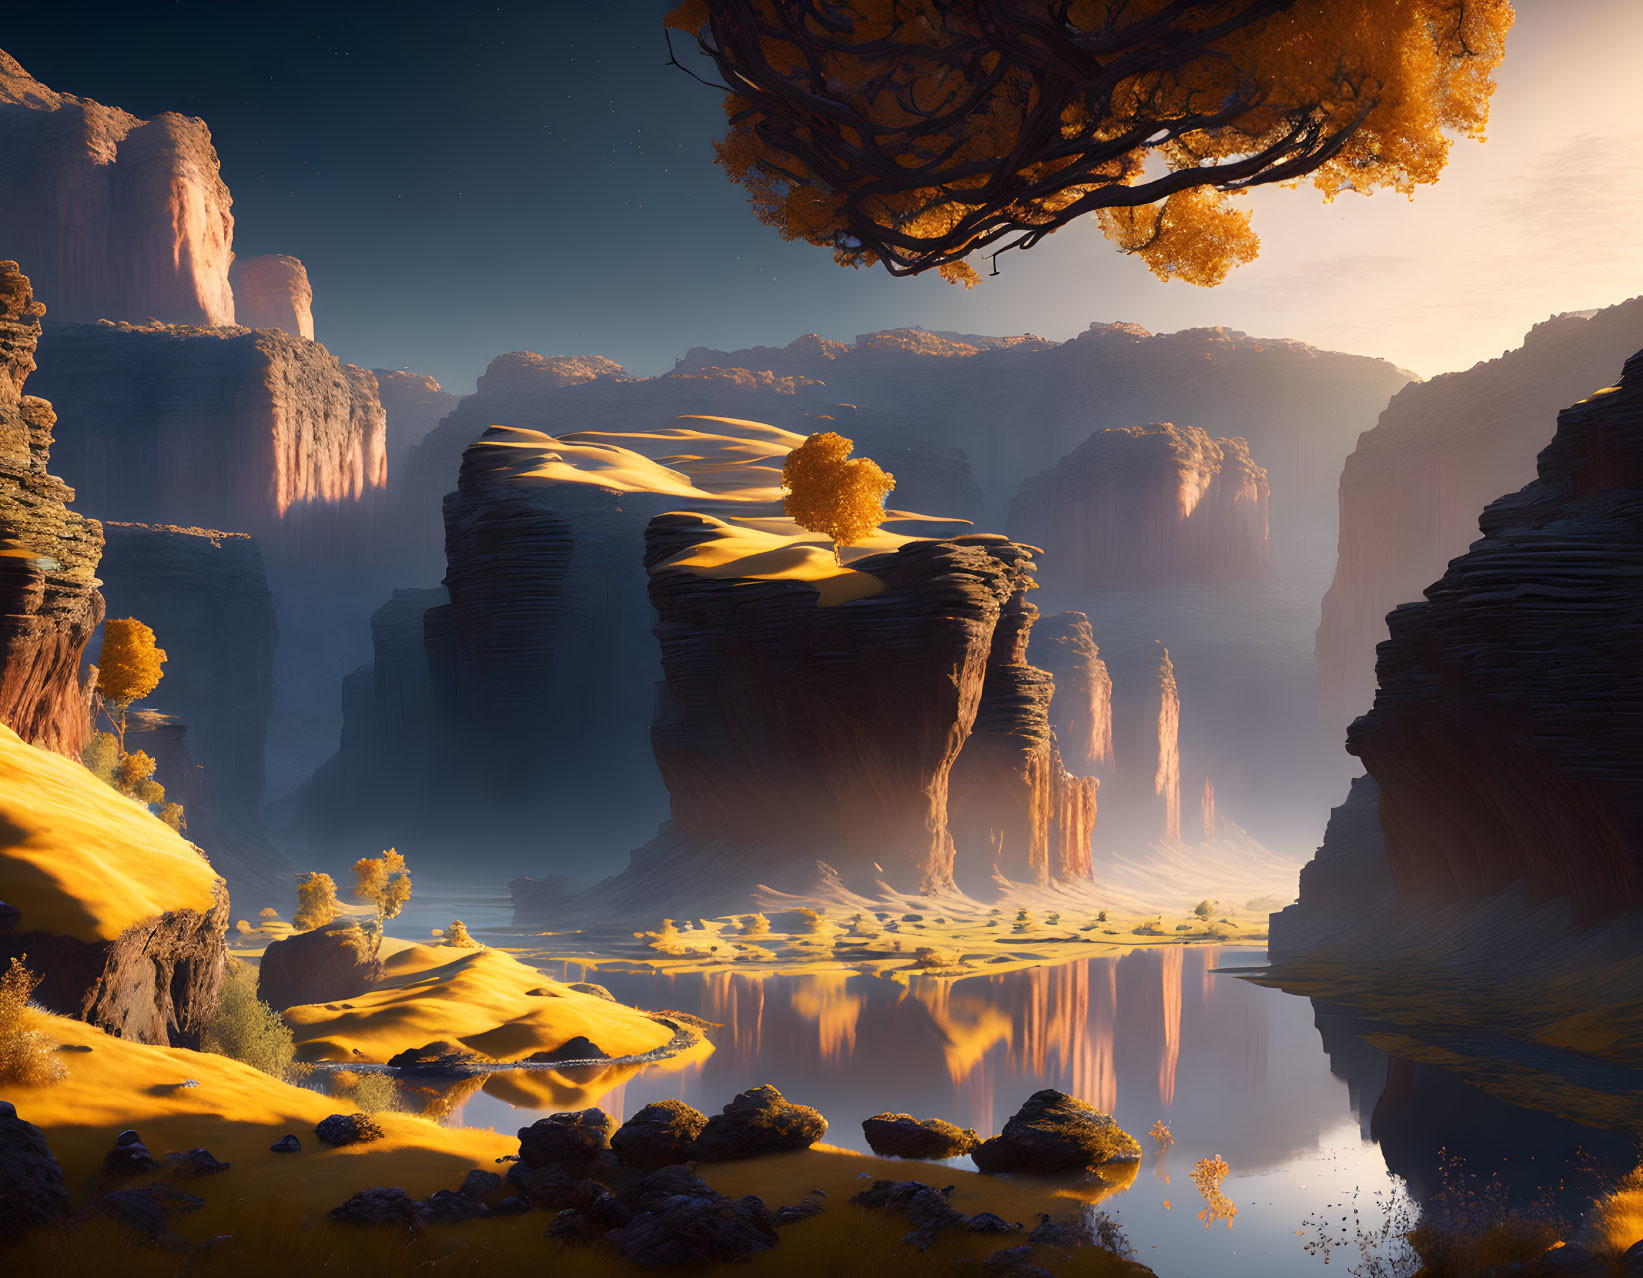 Tranquil digital landscape with cliffs, reflective water, trees, golden foliage, warm light